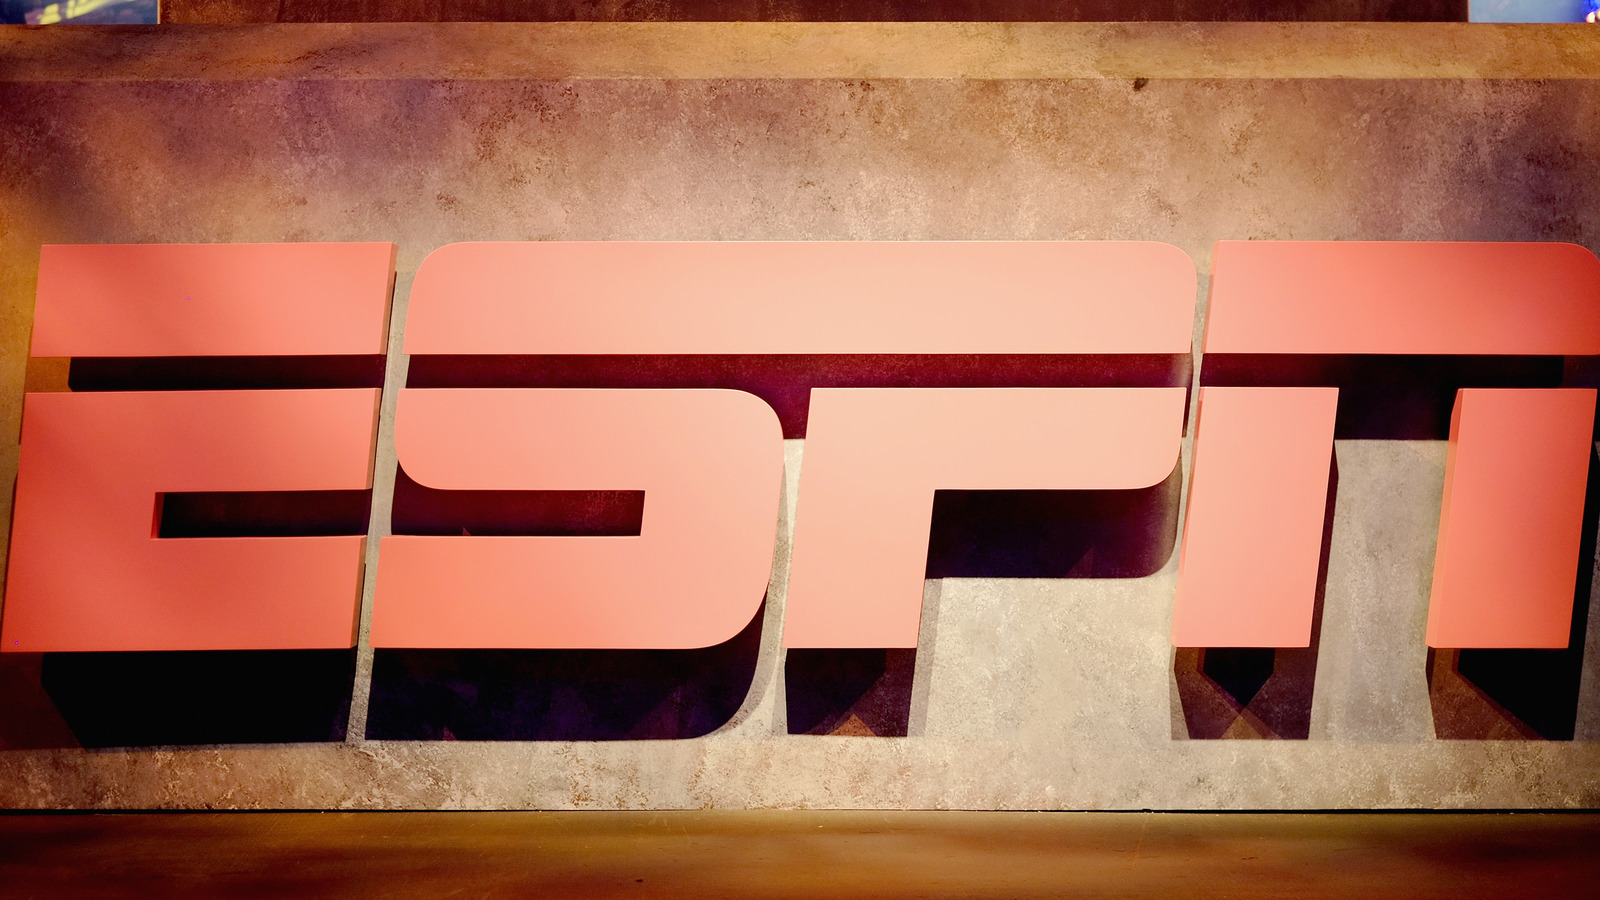 How To Watch ESPN Without Cable (3 Different Ways)